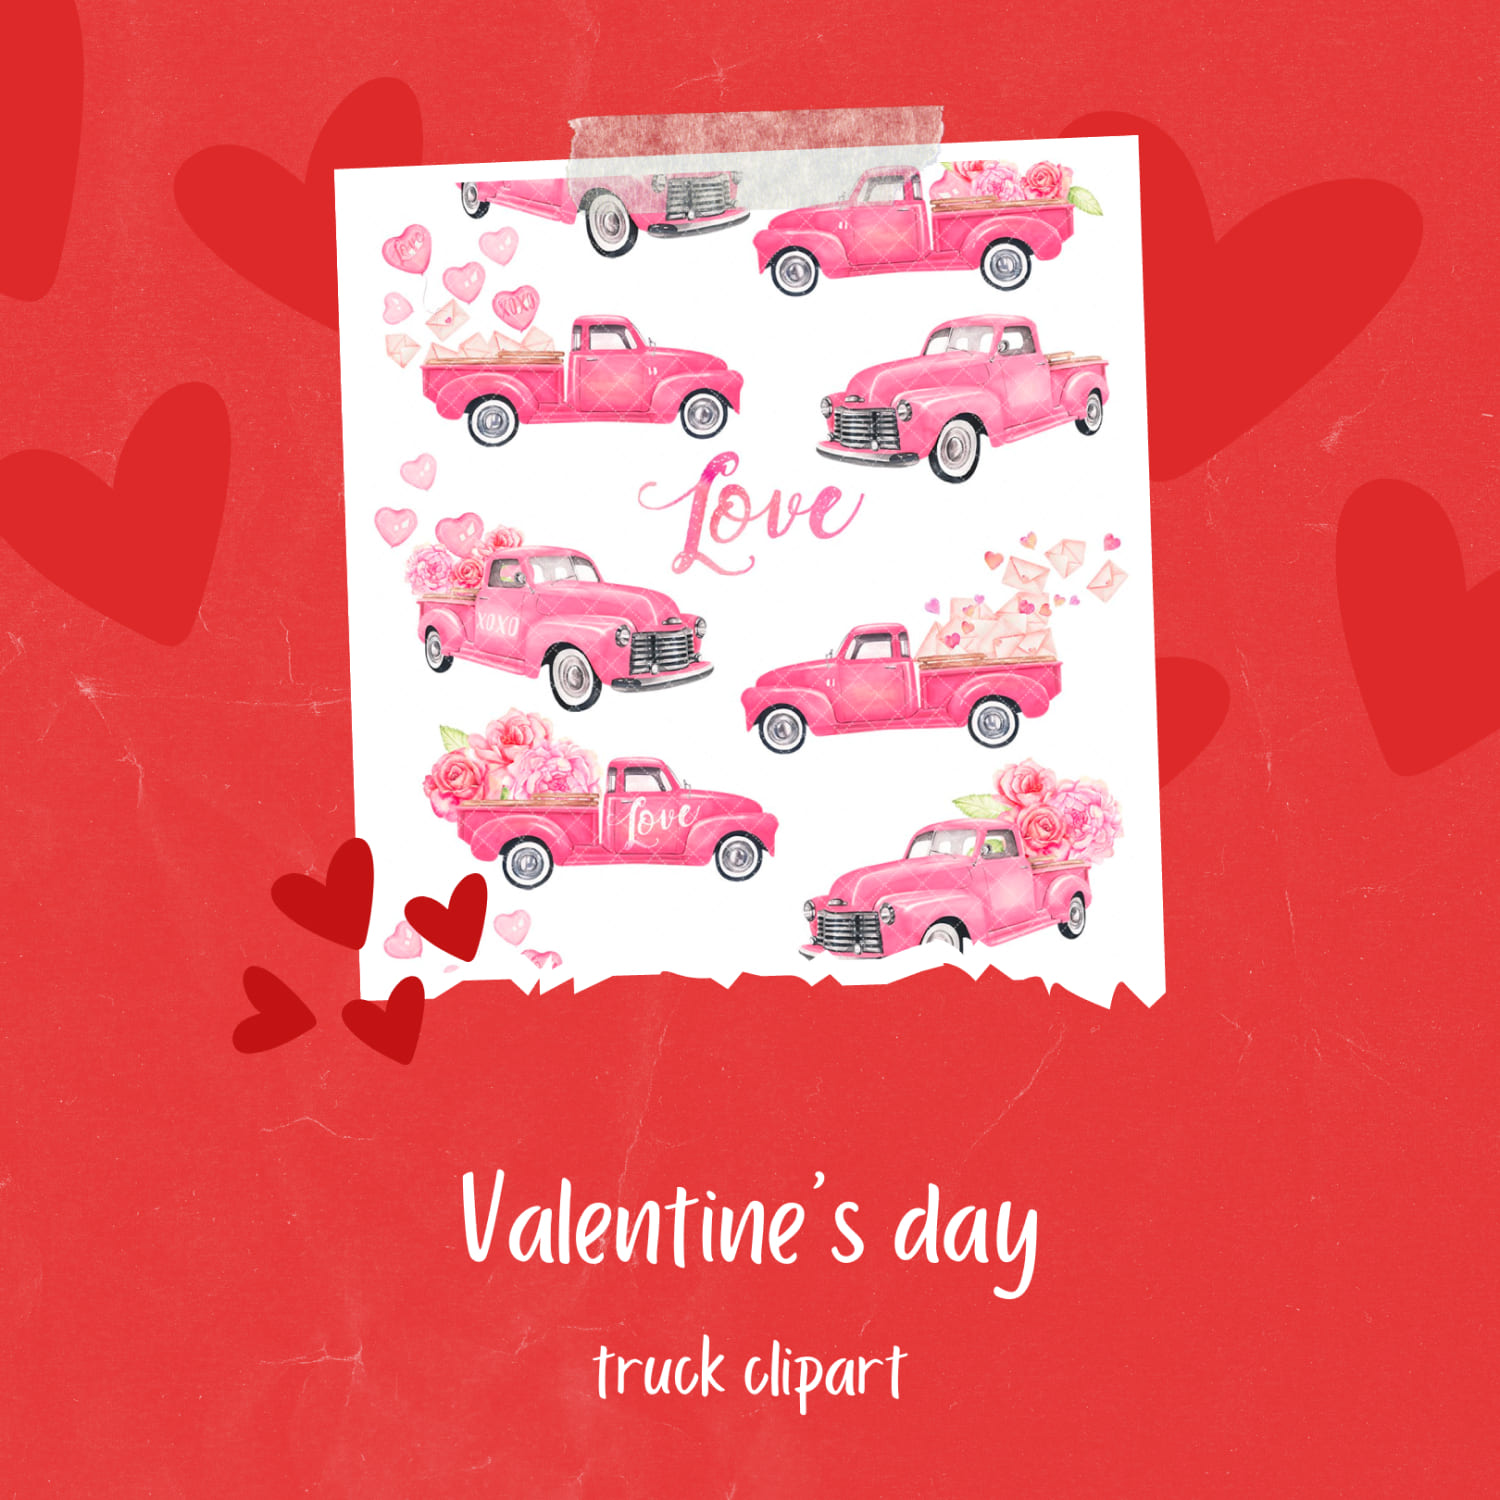 Preview valentines day truck clipart.